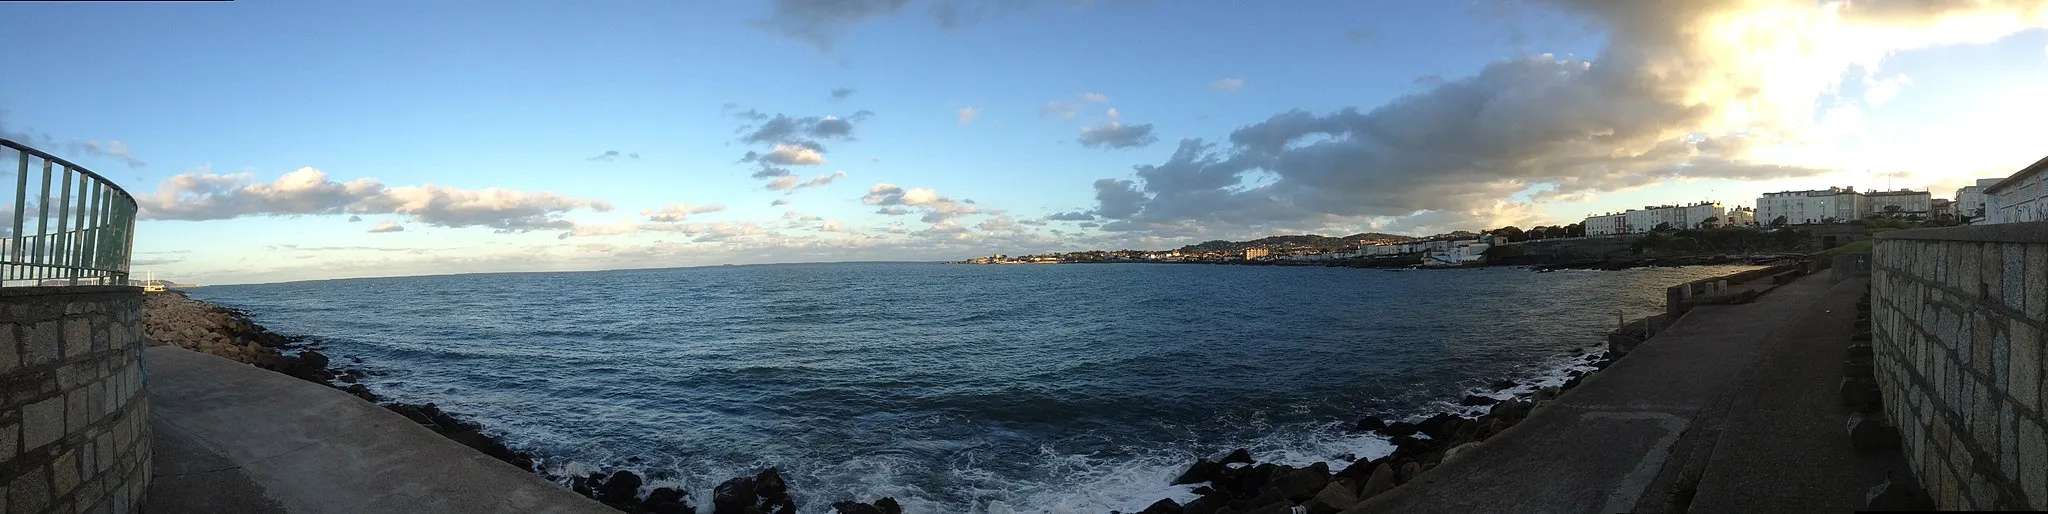 Photo showing: View of the Irish sea from the pier at  Dun Laoghaire harbour